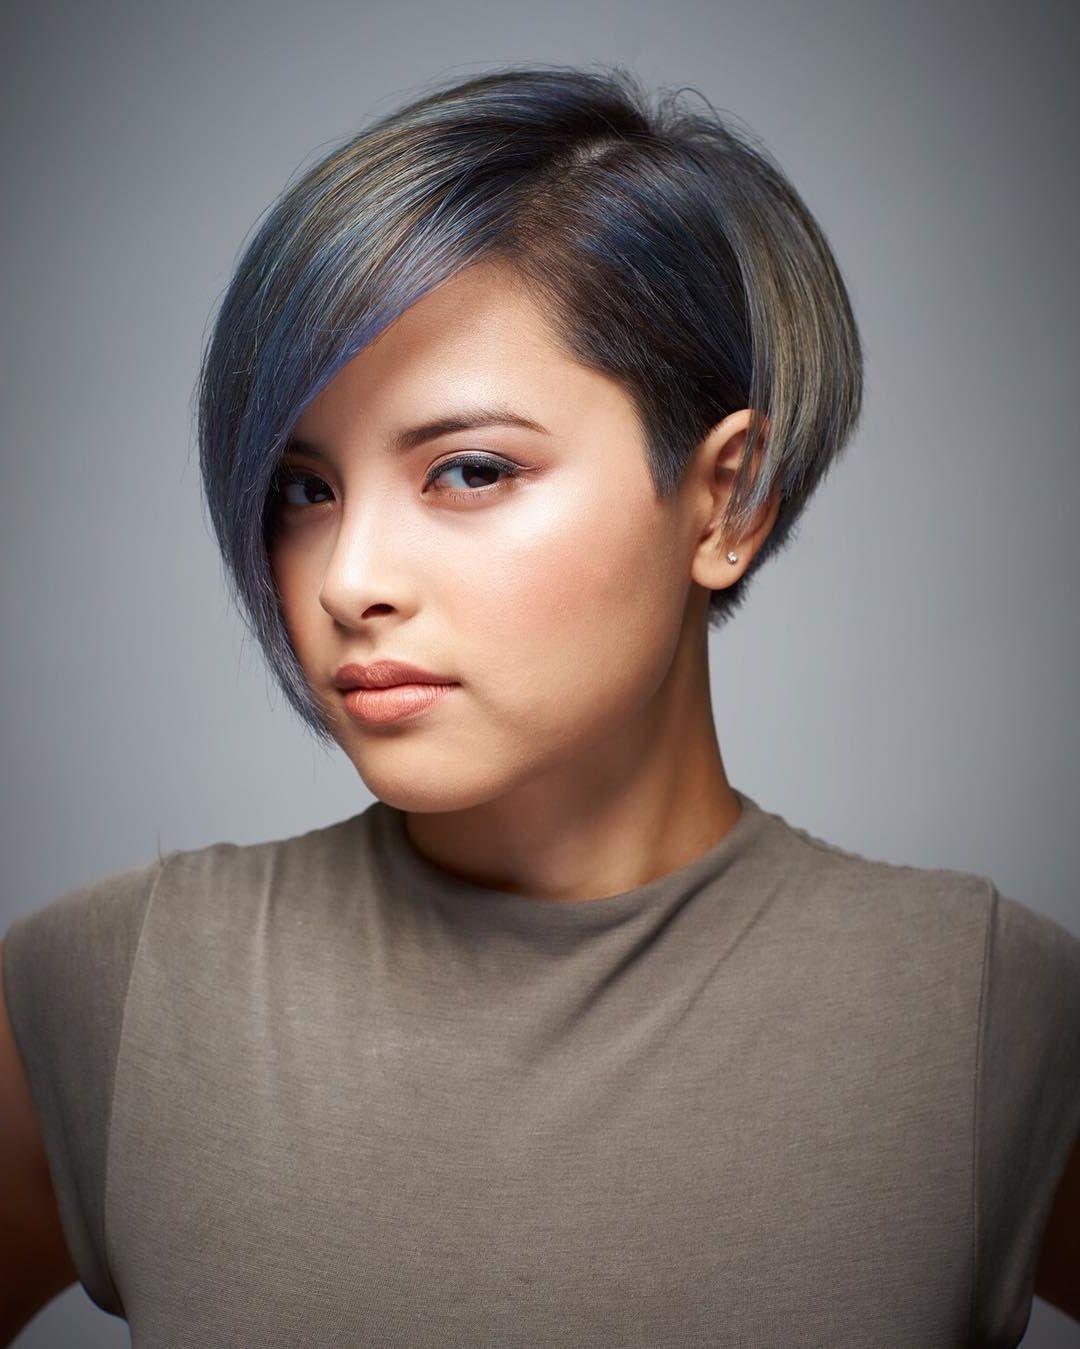 Short Hairstyles: 15 Cutest Short Haircuts For Women In 2017 Pertaining To Short Haircuts For Girls With Glasses (View 15 of 25)